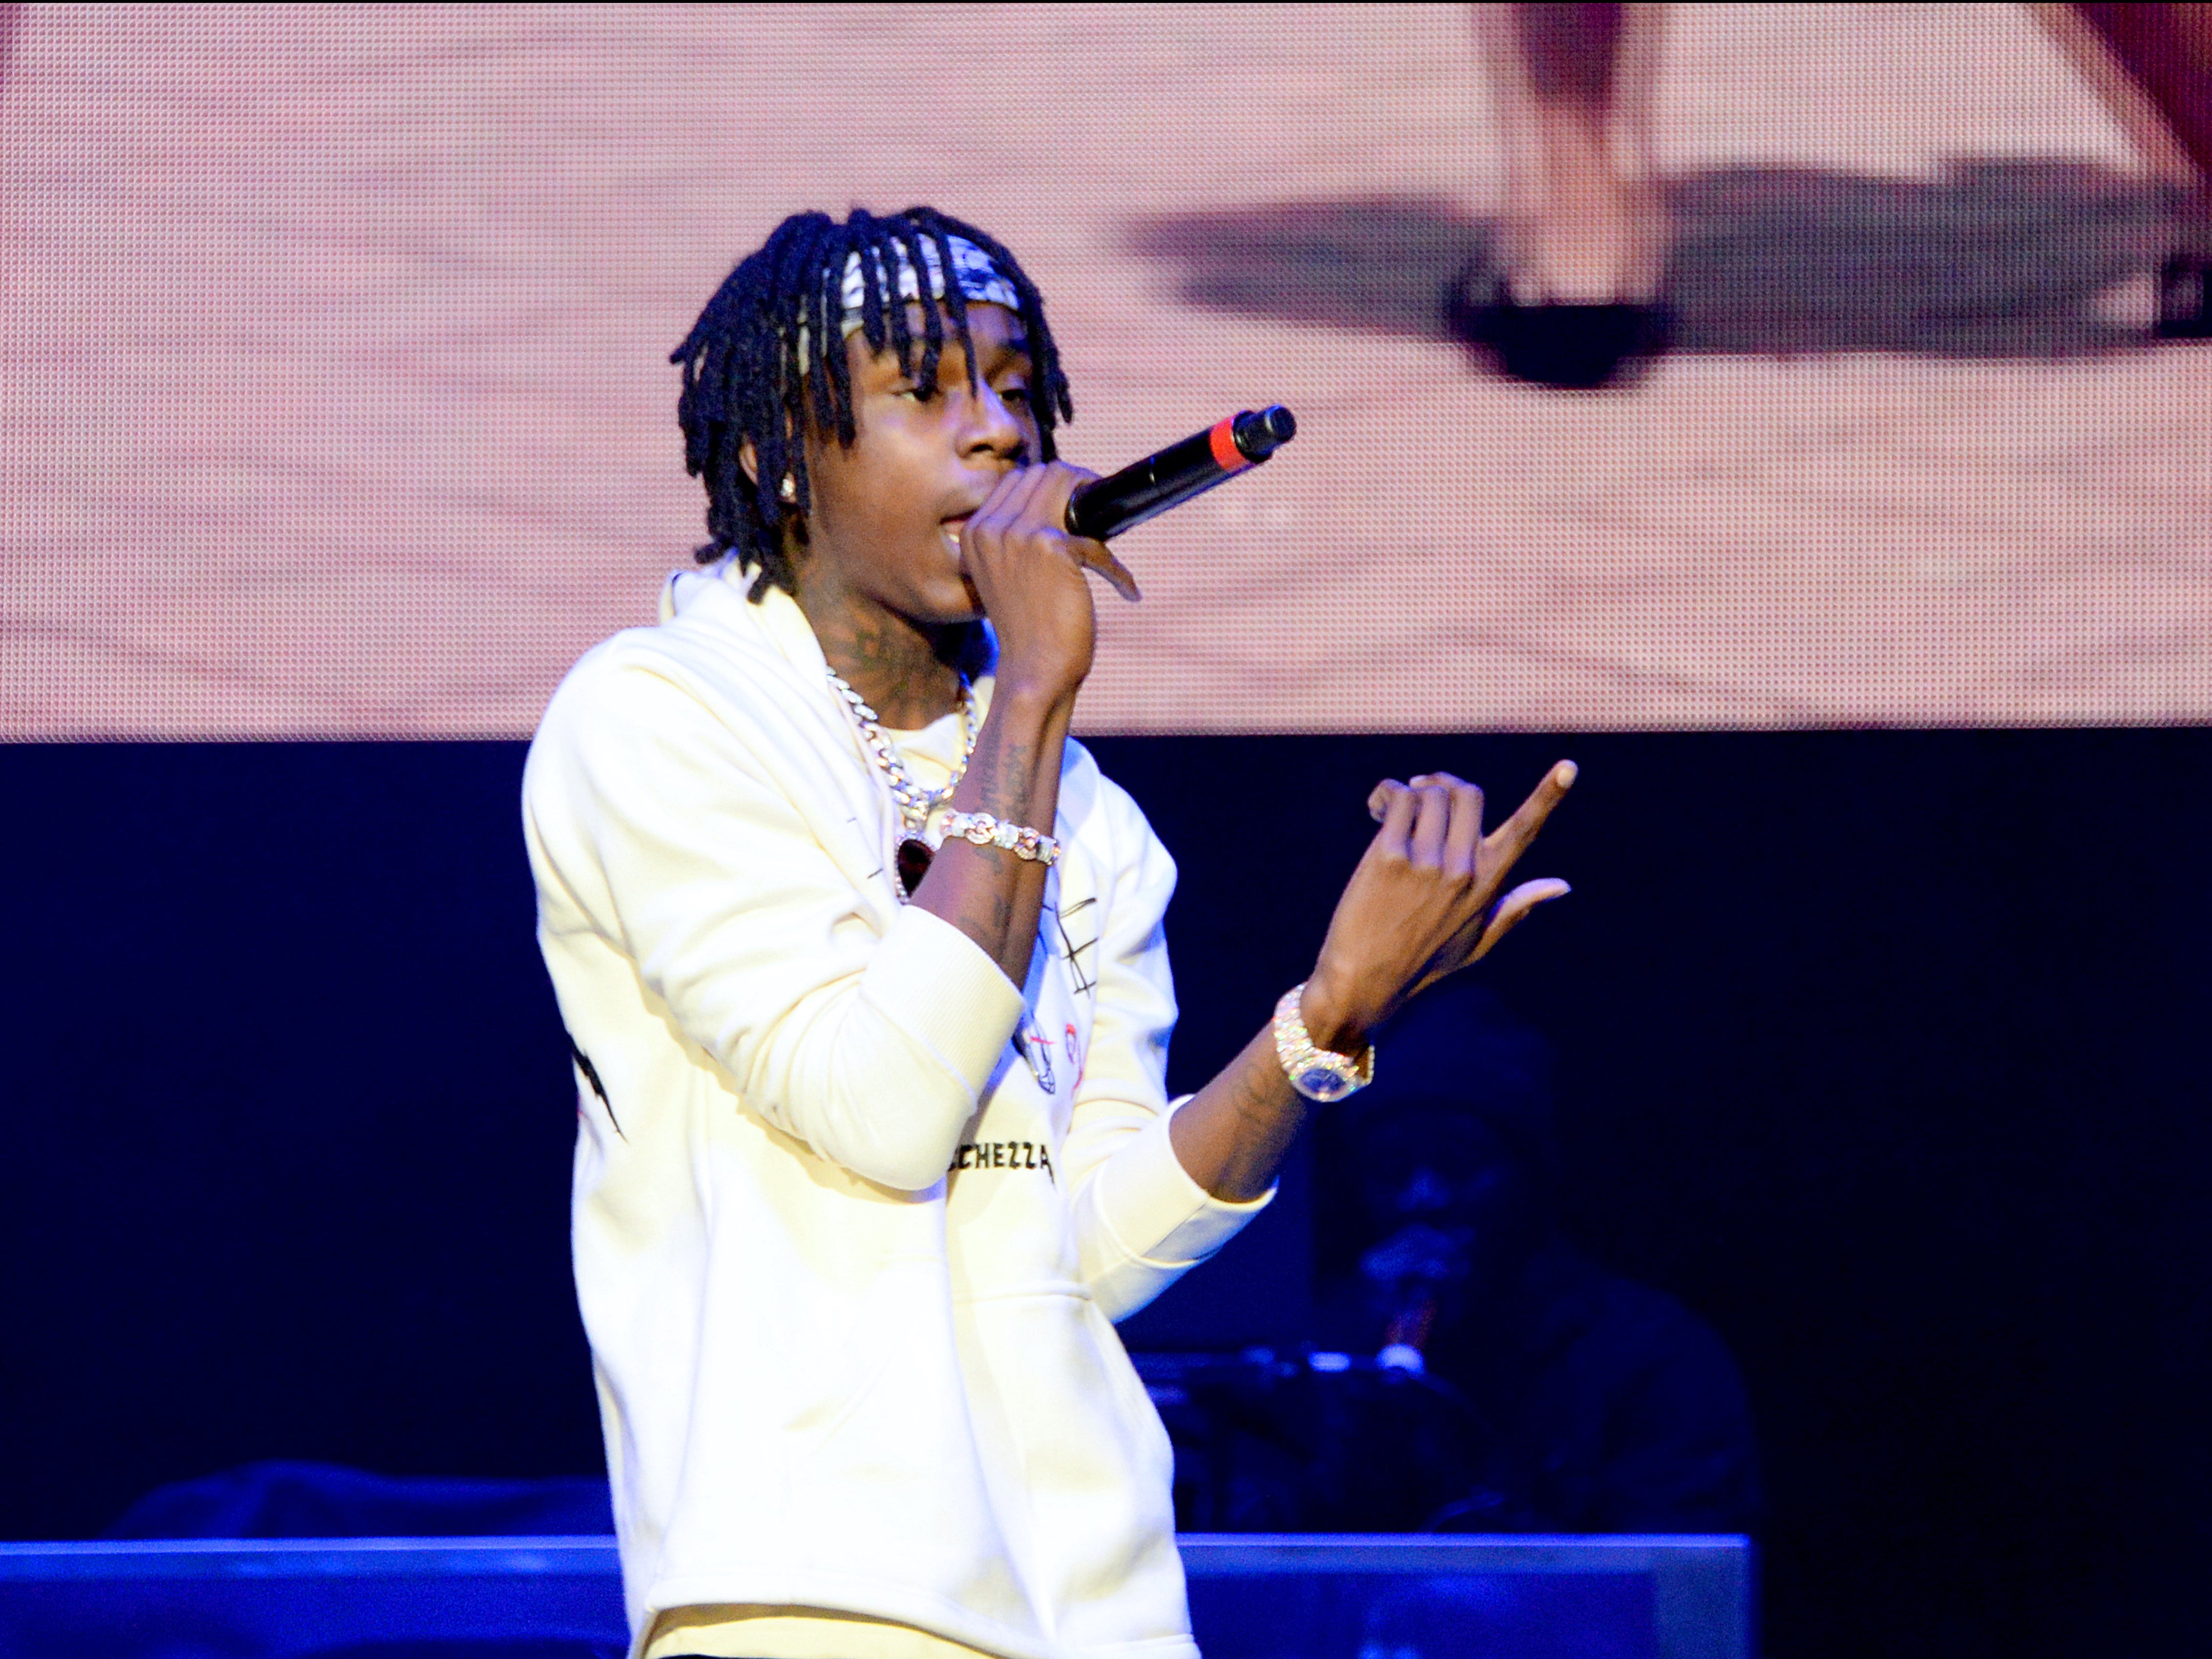 Polo G performing in 2019